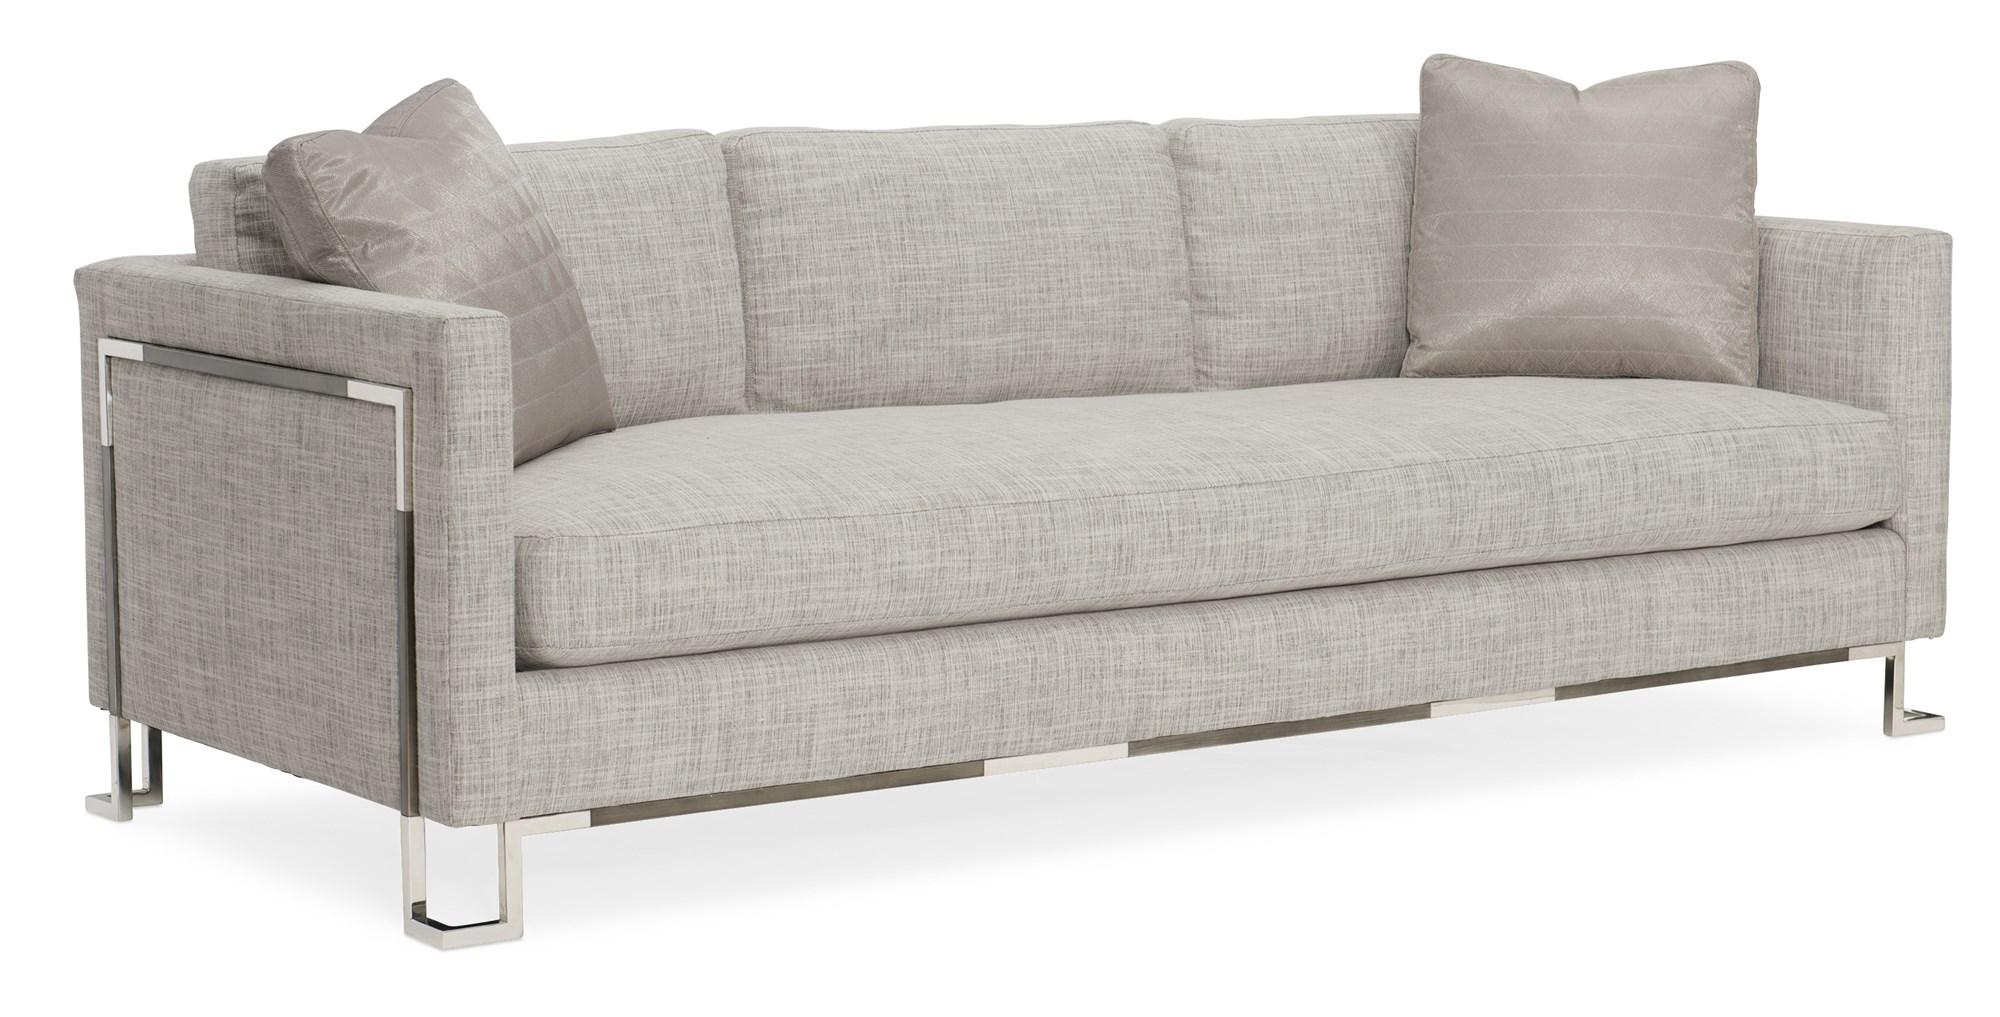 

    
Moonlight Silver Fabric & Stainless-Steel Frame Sofa OPEN FRAMEWORK by Caracole
